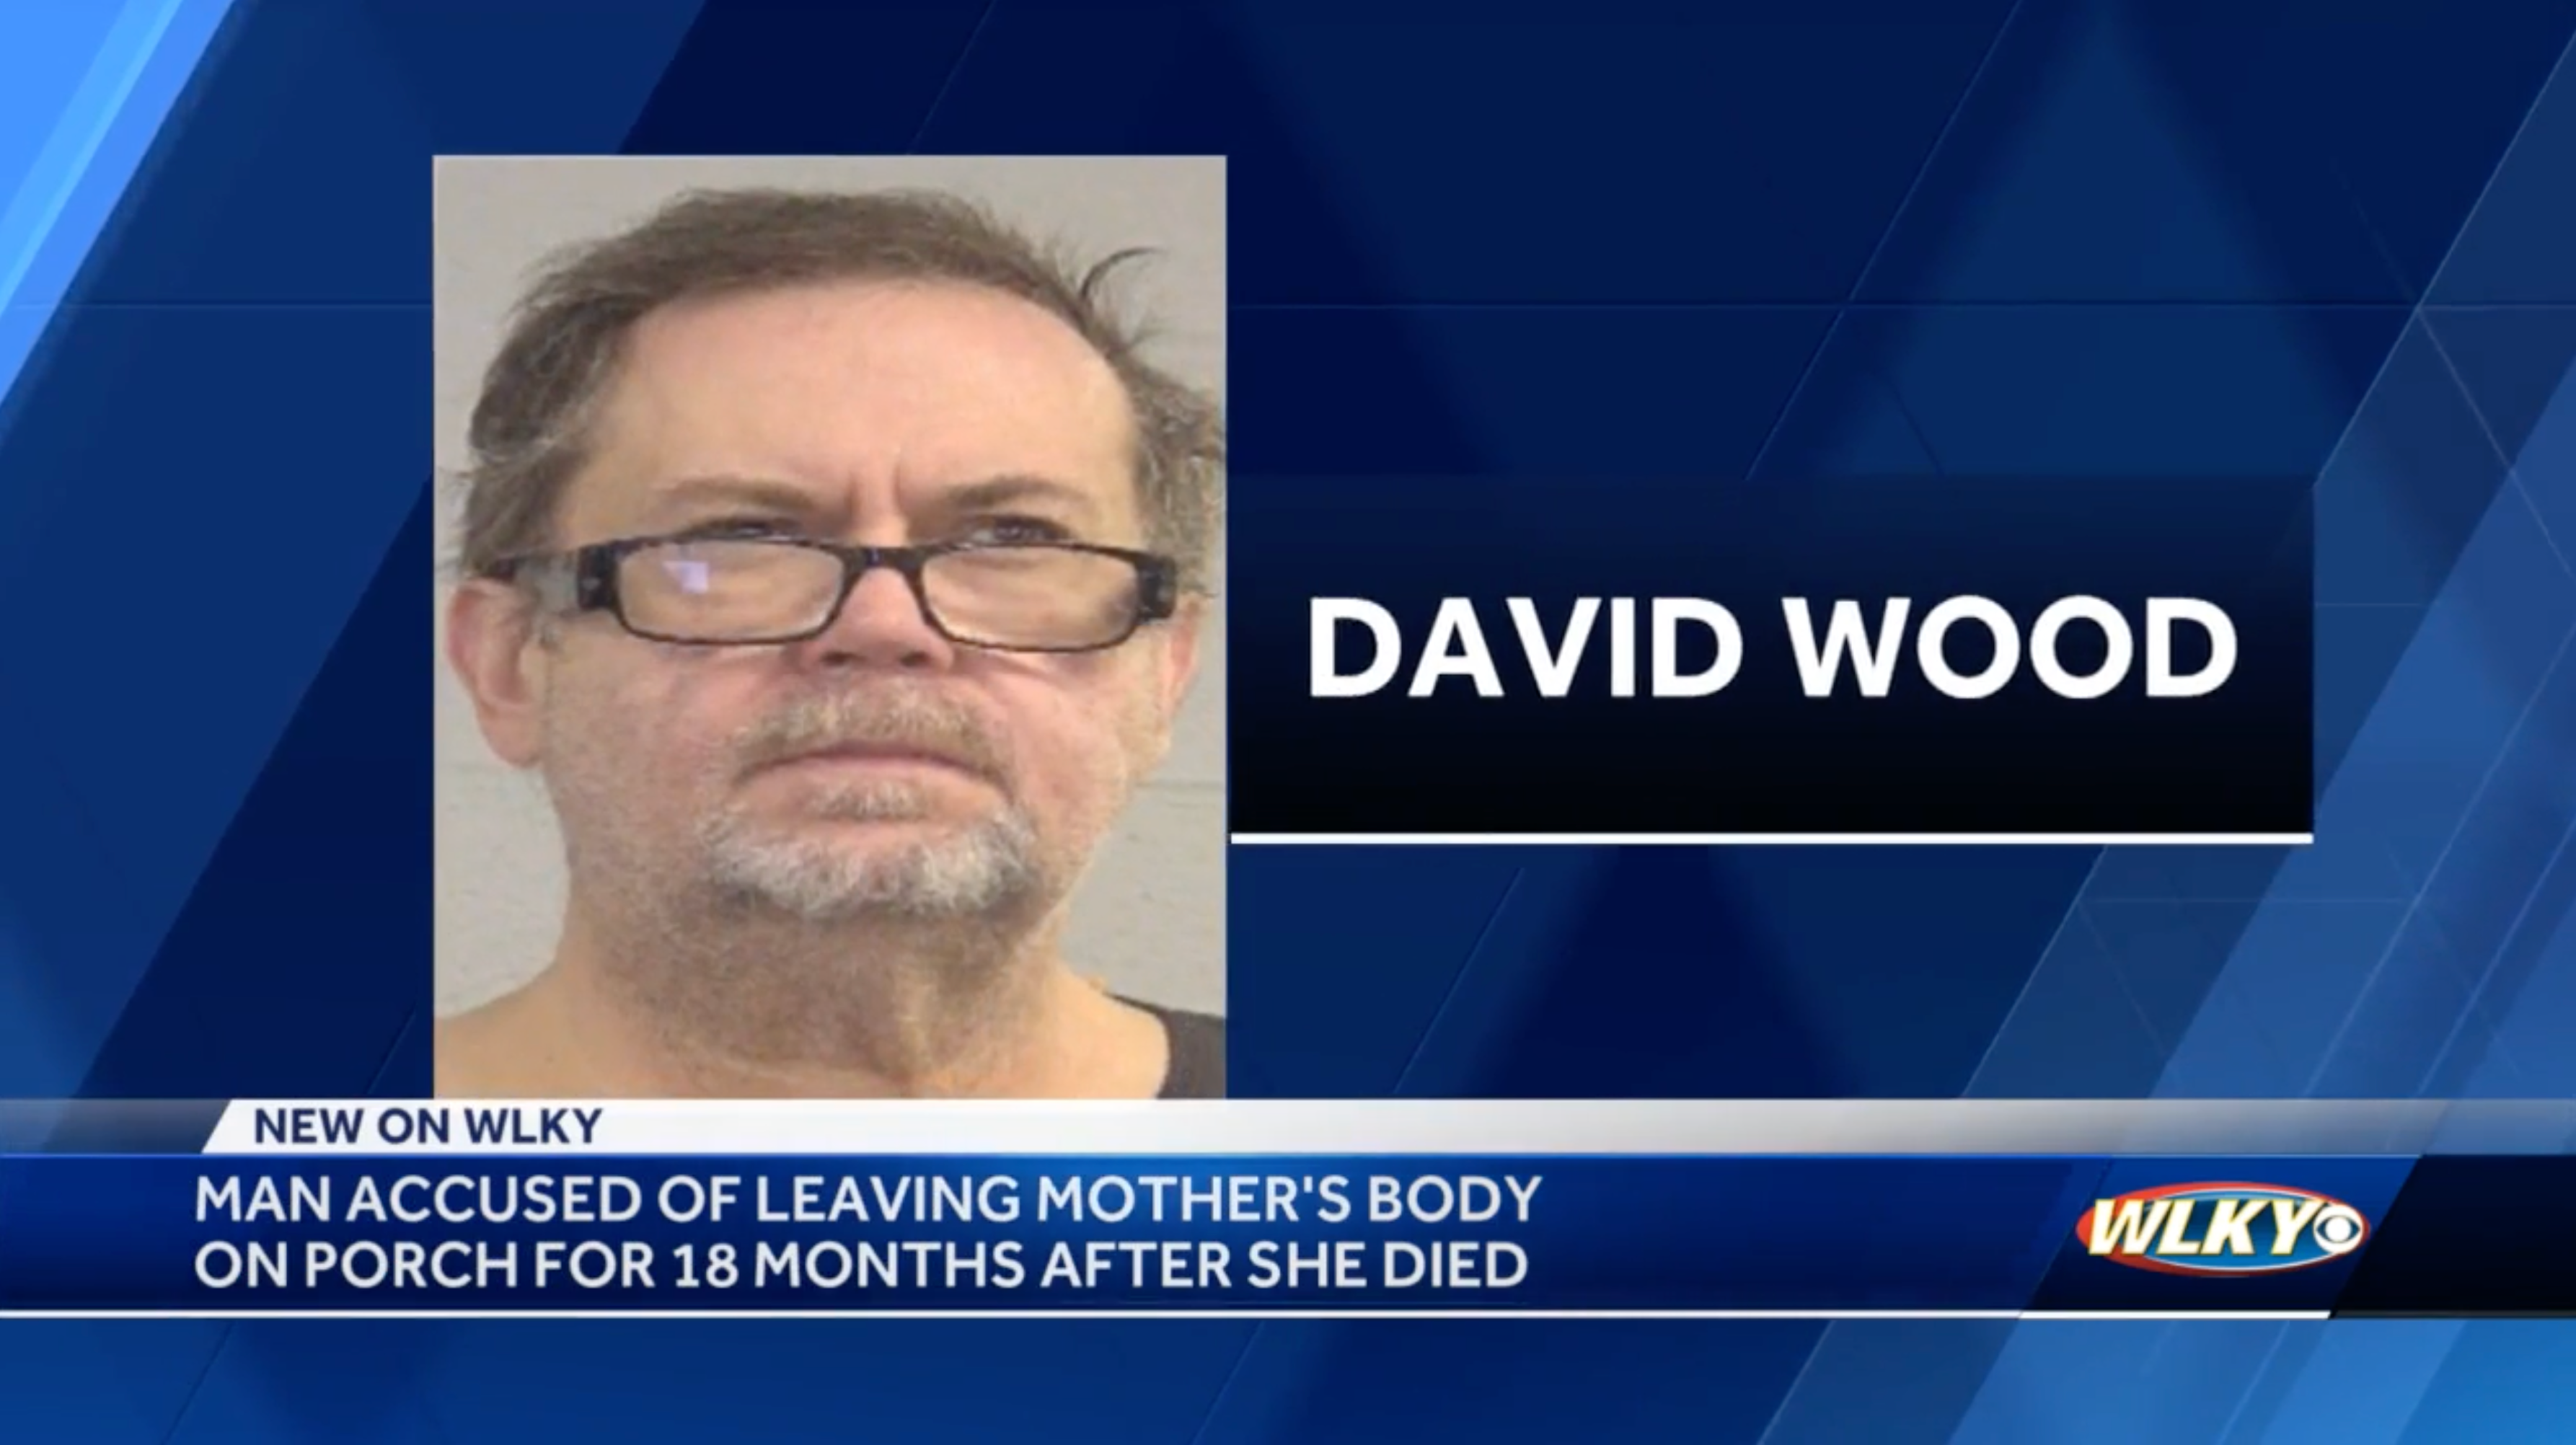 David Wood, 57, has been charged with abuse of a corpse